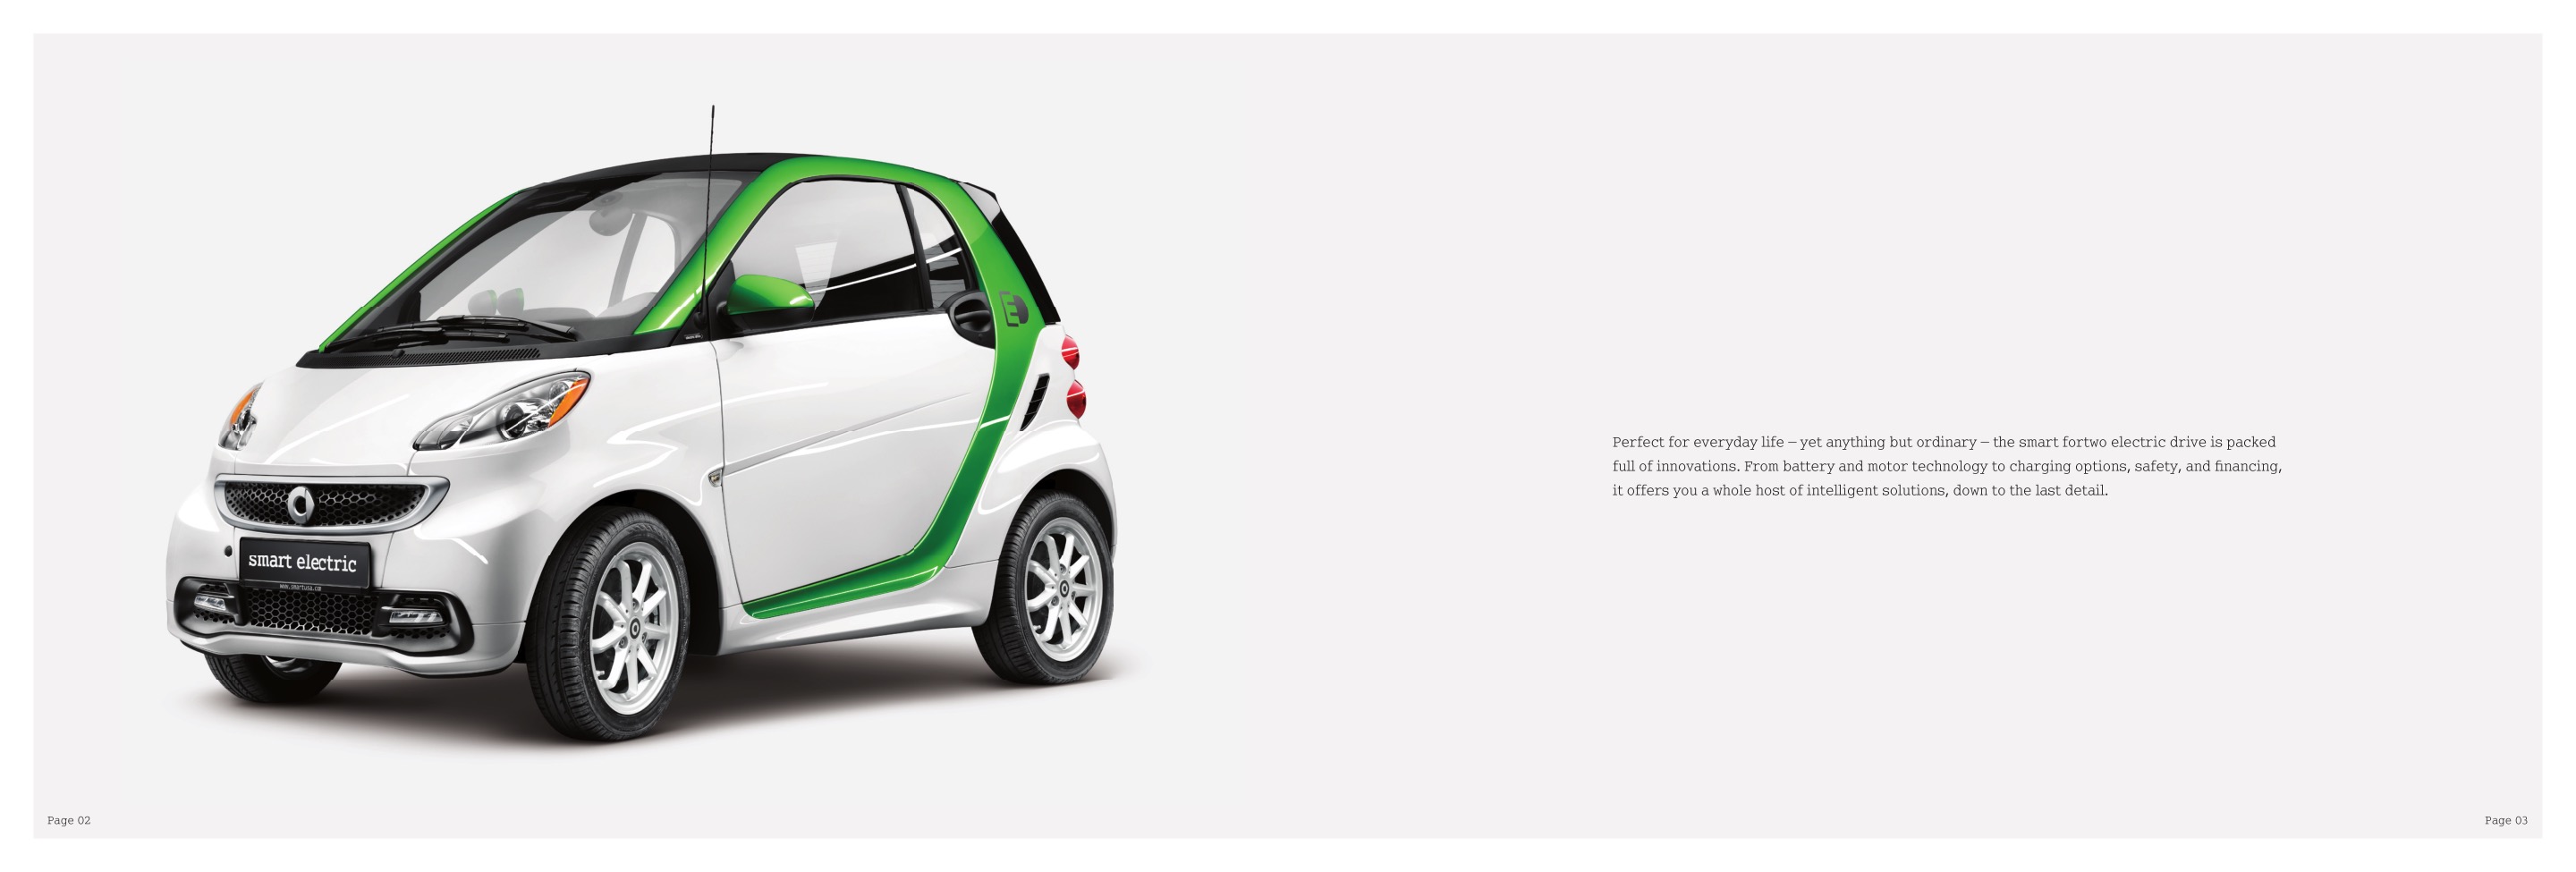 2015 Smart Fortwo Electric Brochure Page 8